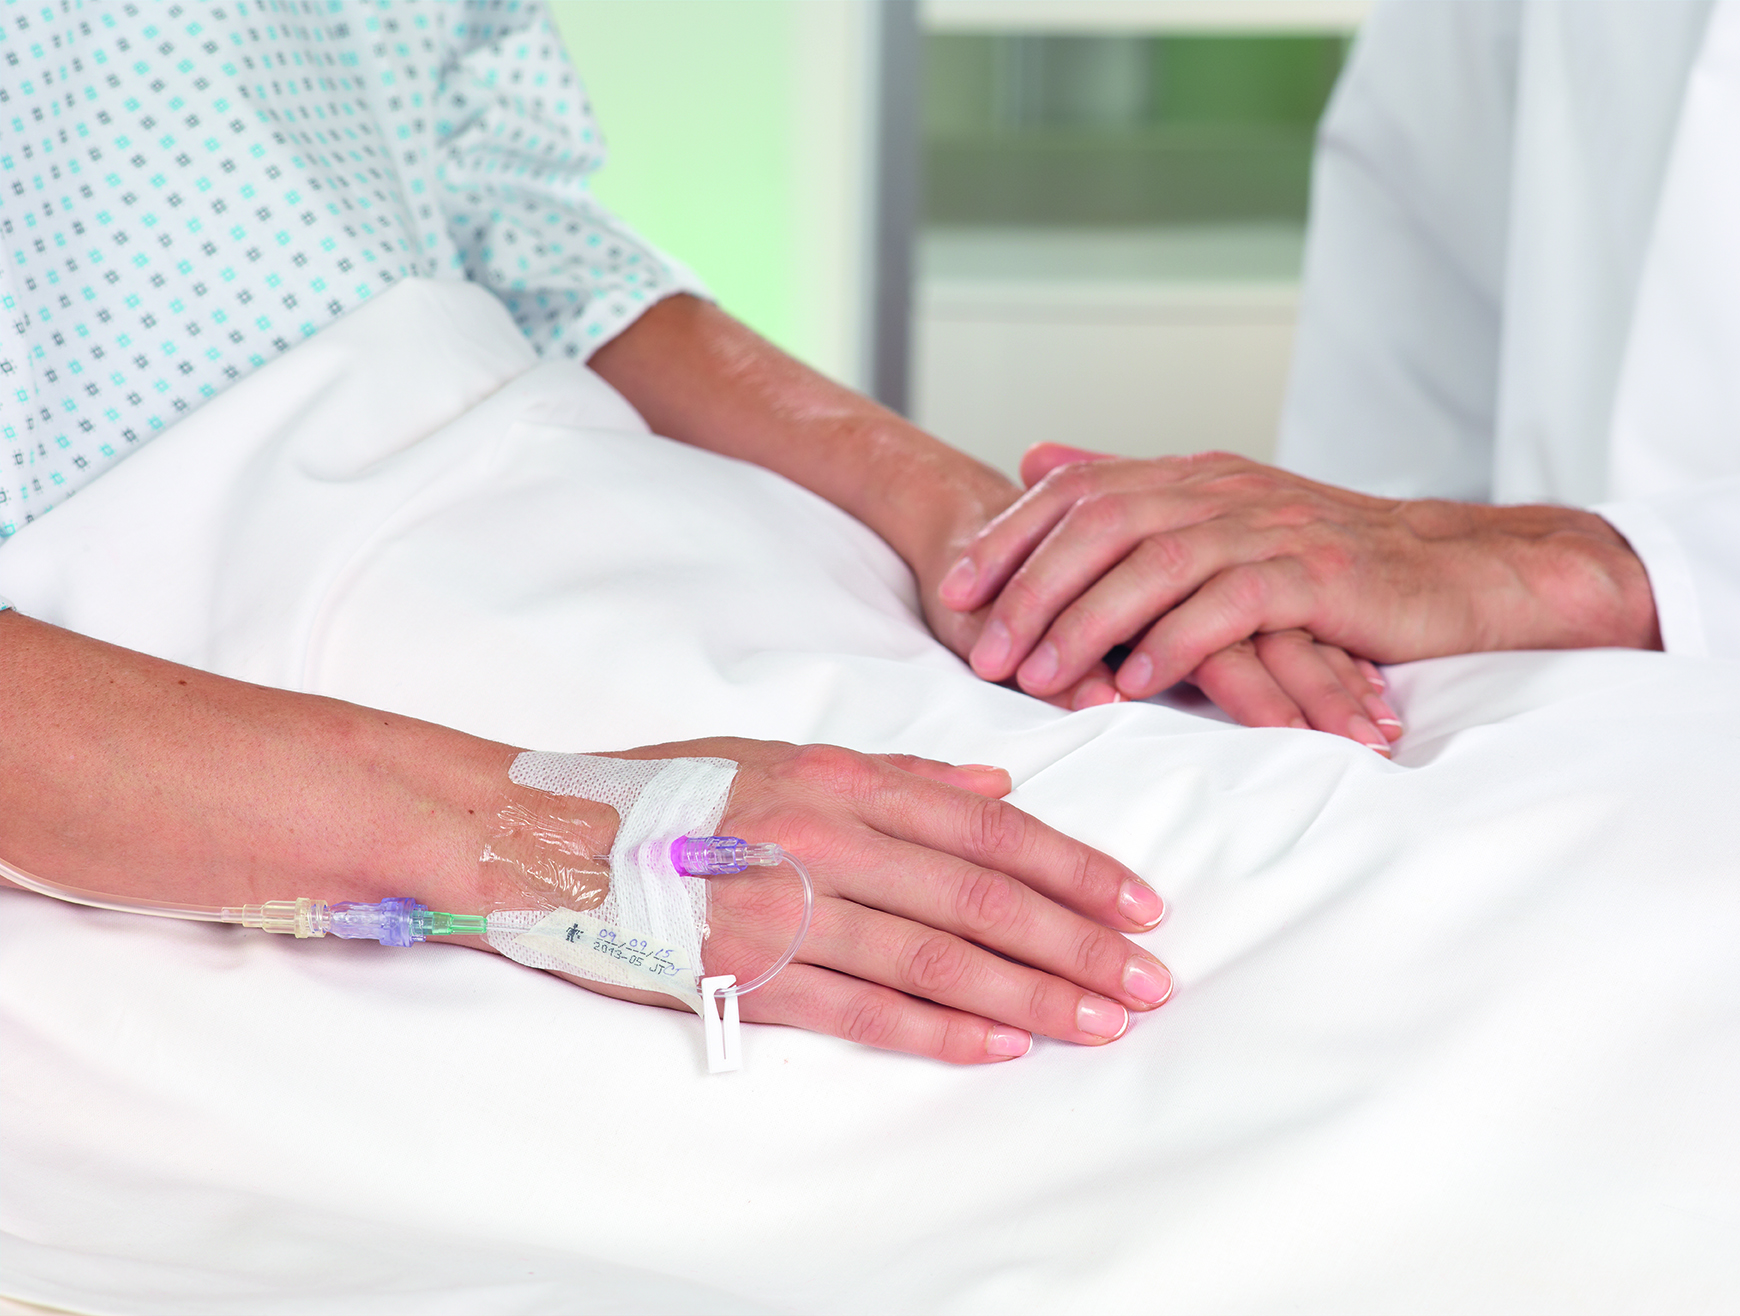 Introcan Safety 3 patient access – holding a hand